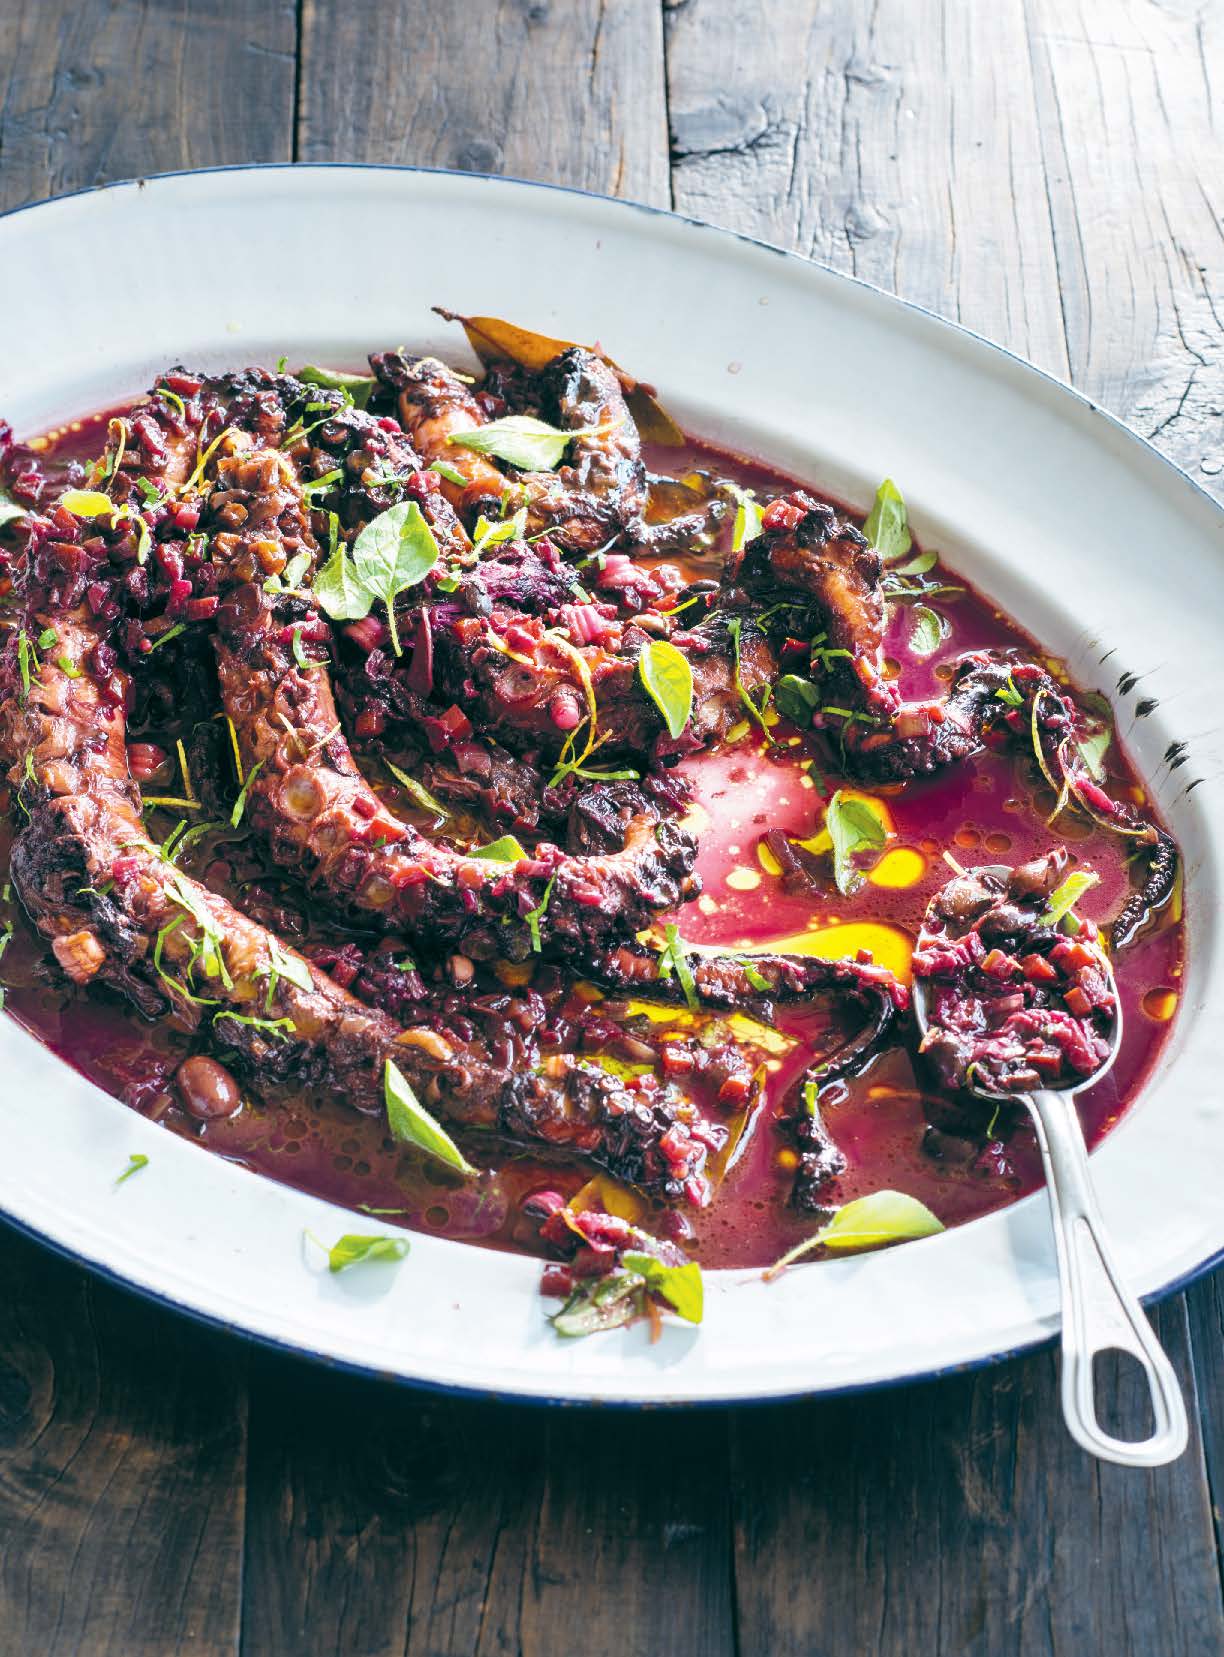 Octopus braised in red wine with lemon and oregano